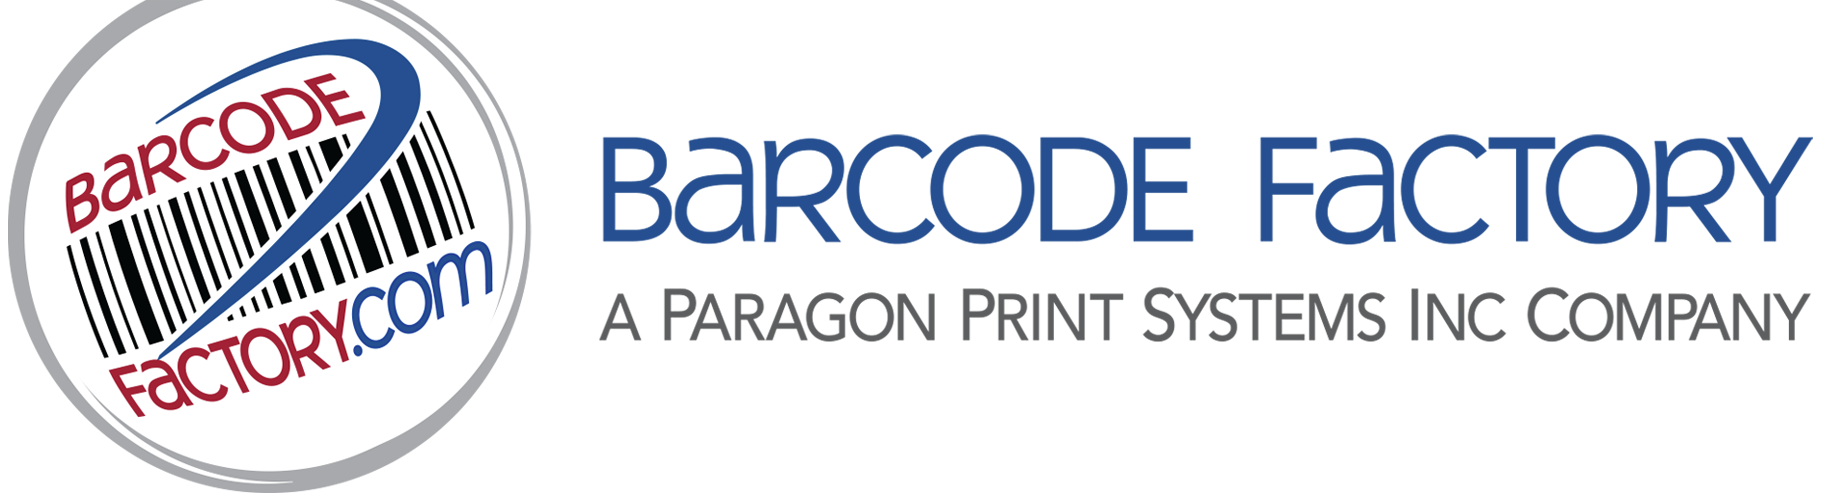 barcode printer and label online resource for all types of business applications